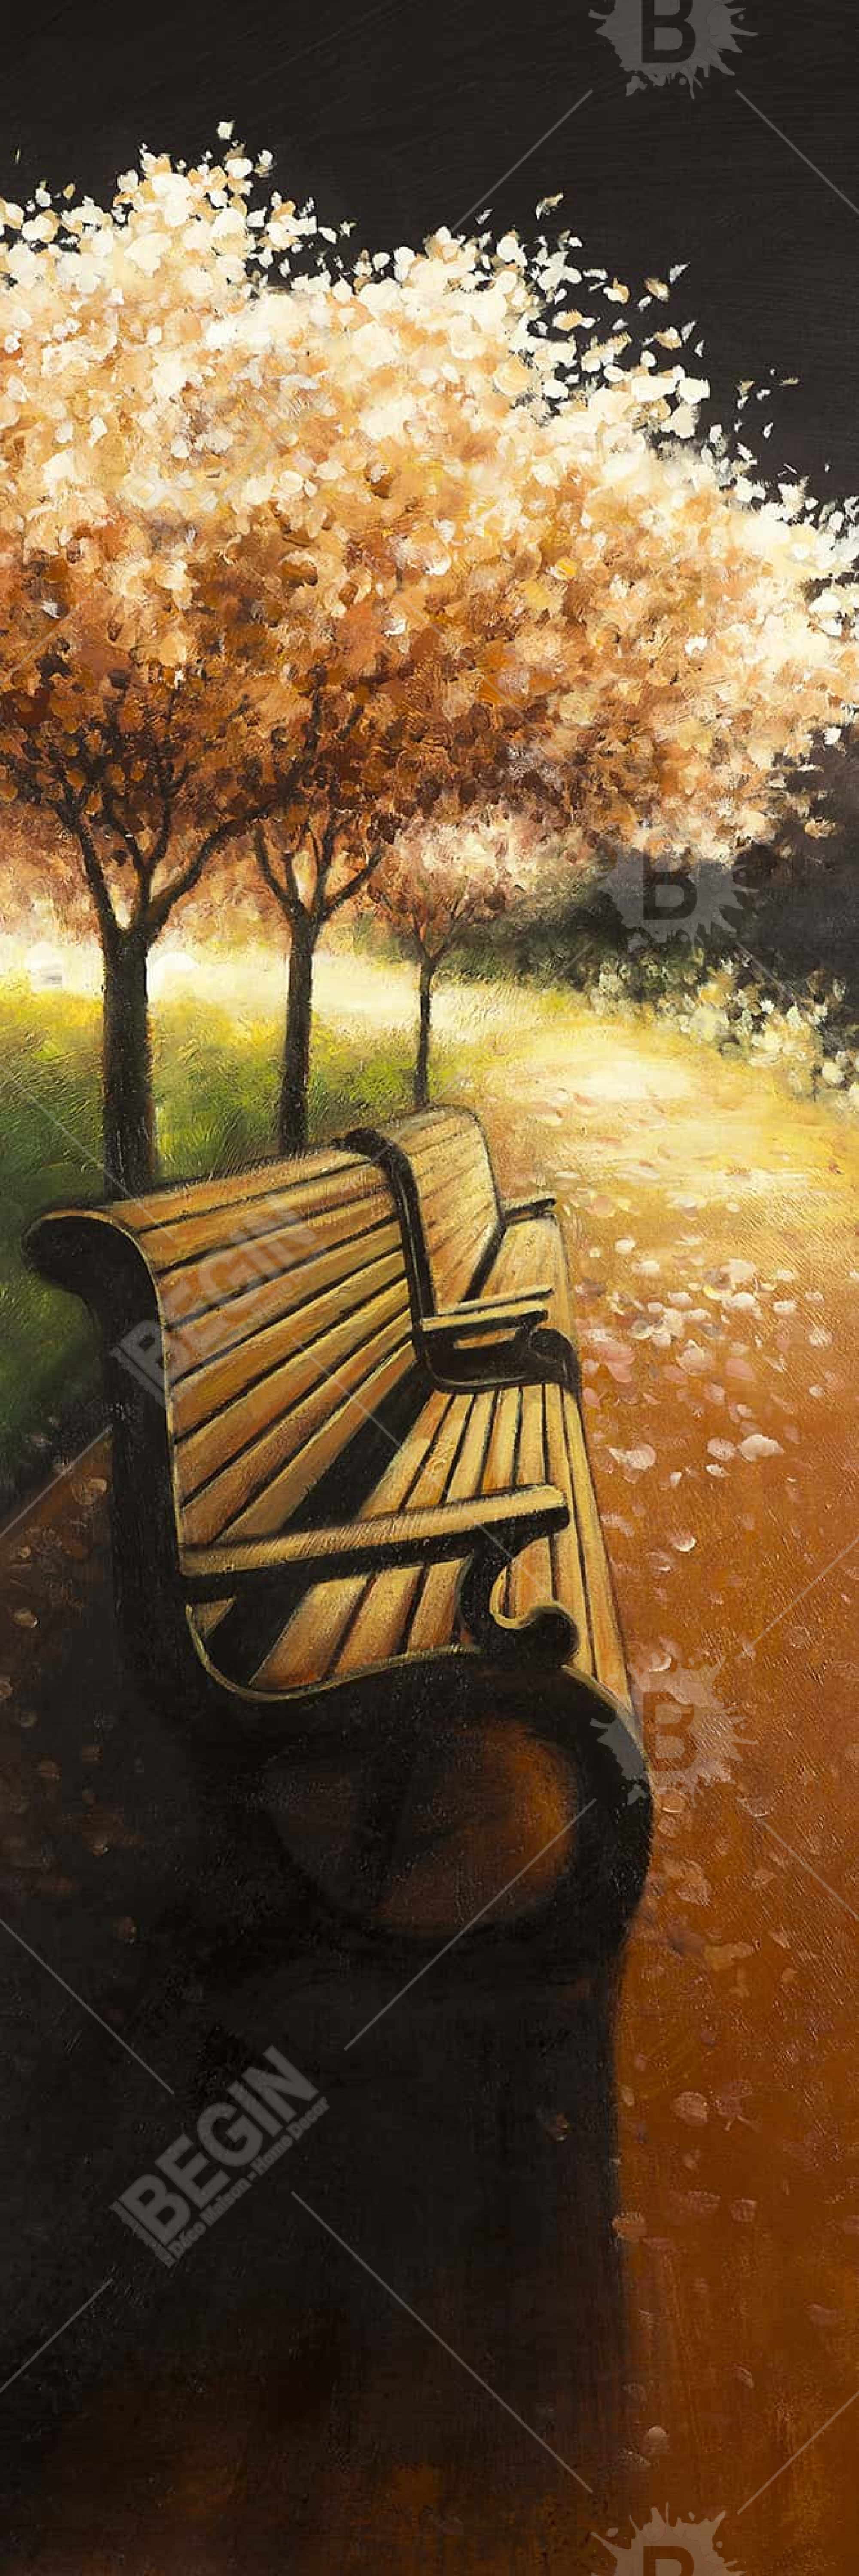 Park bench on a fall day